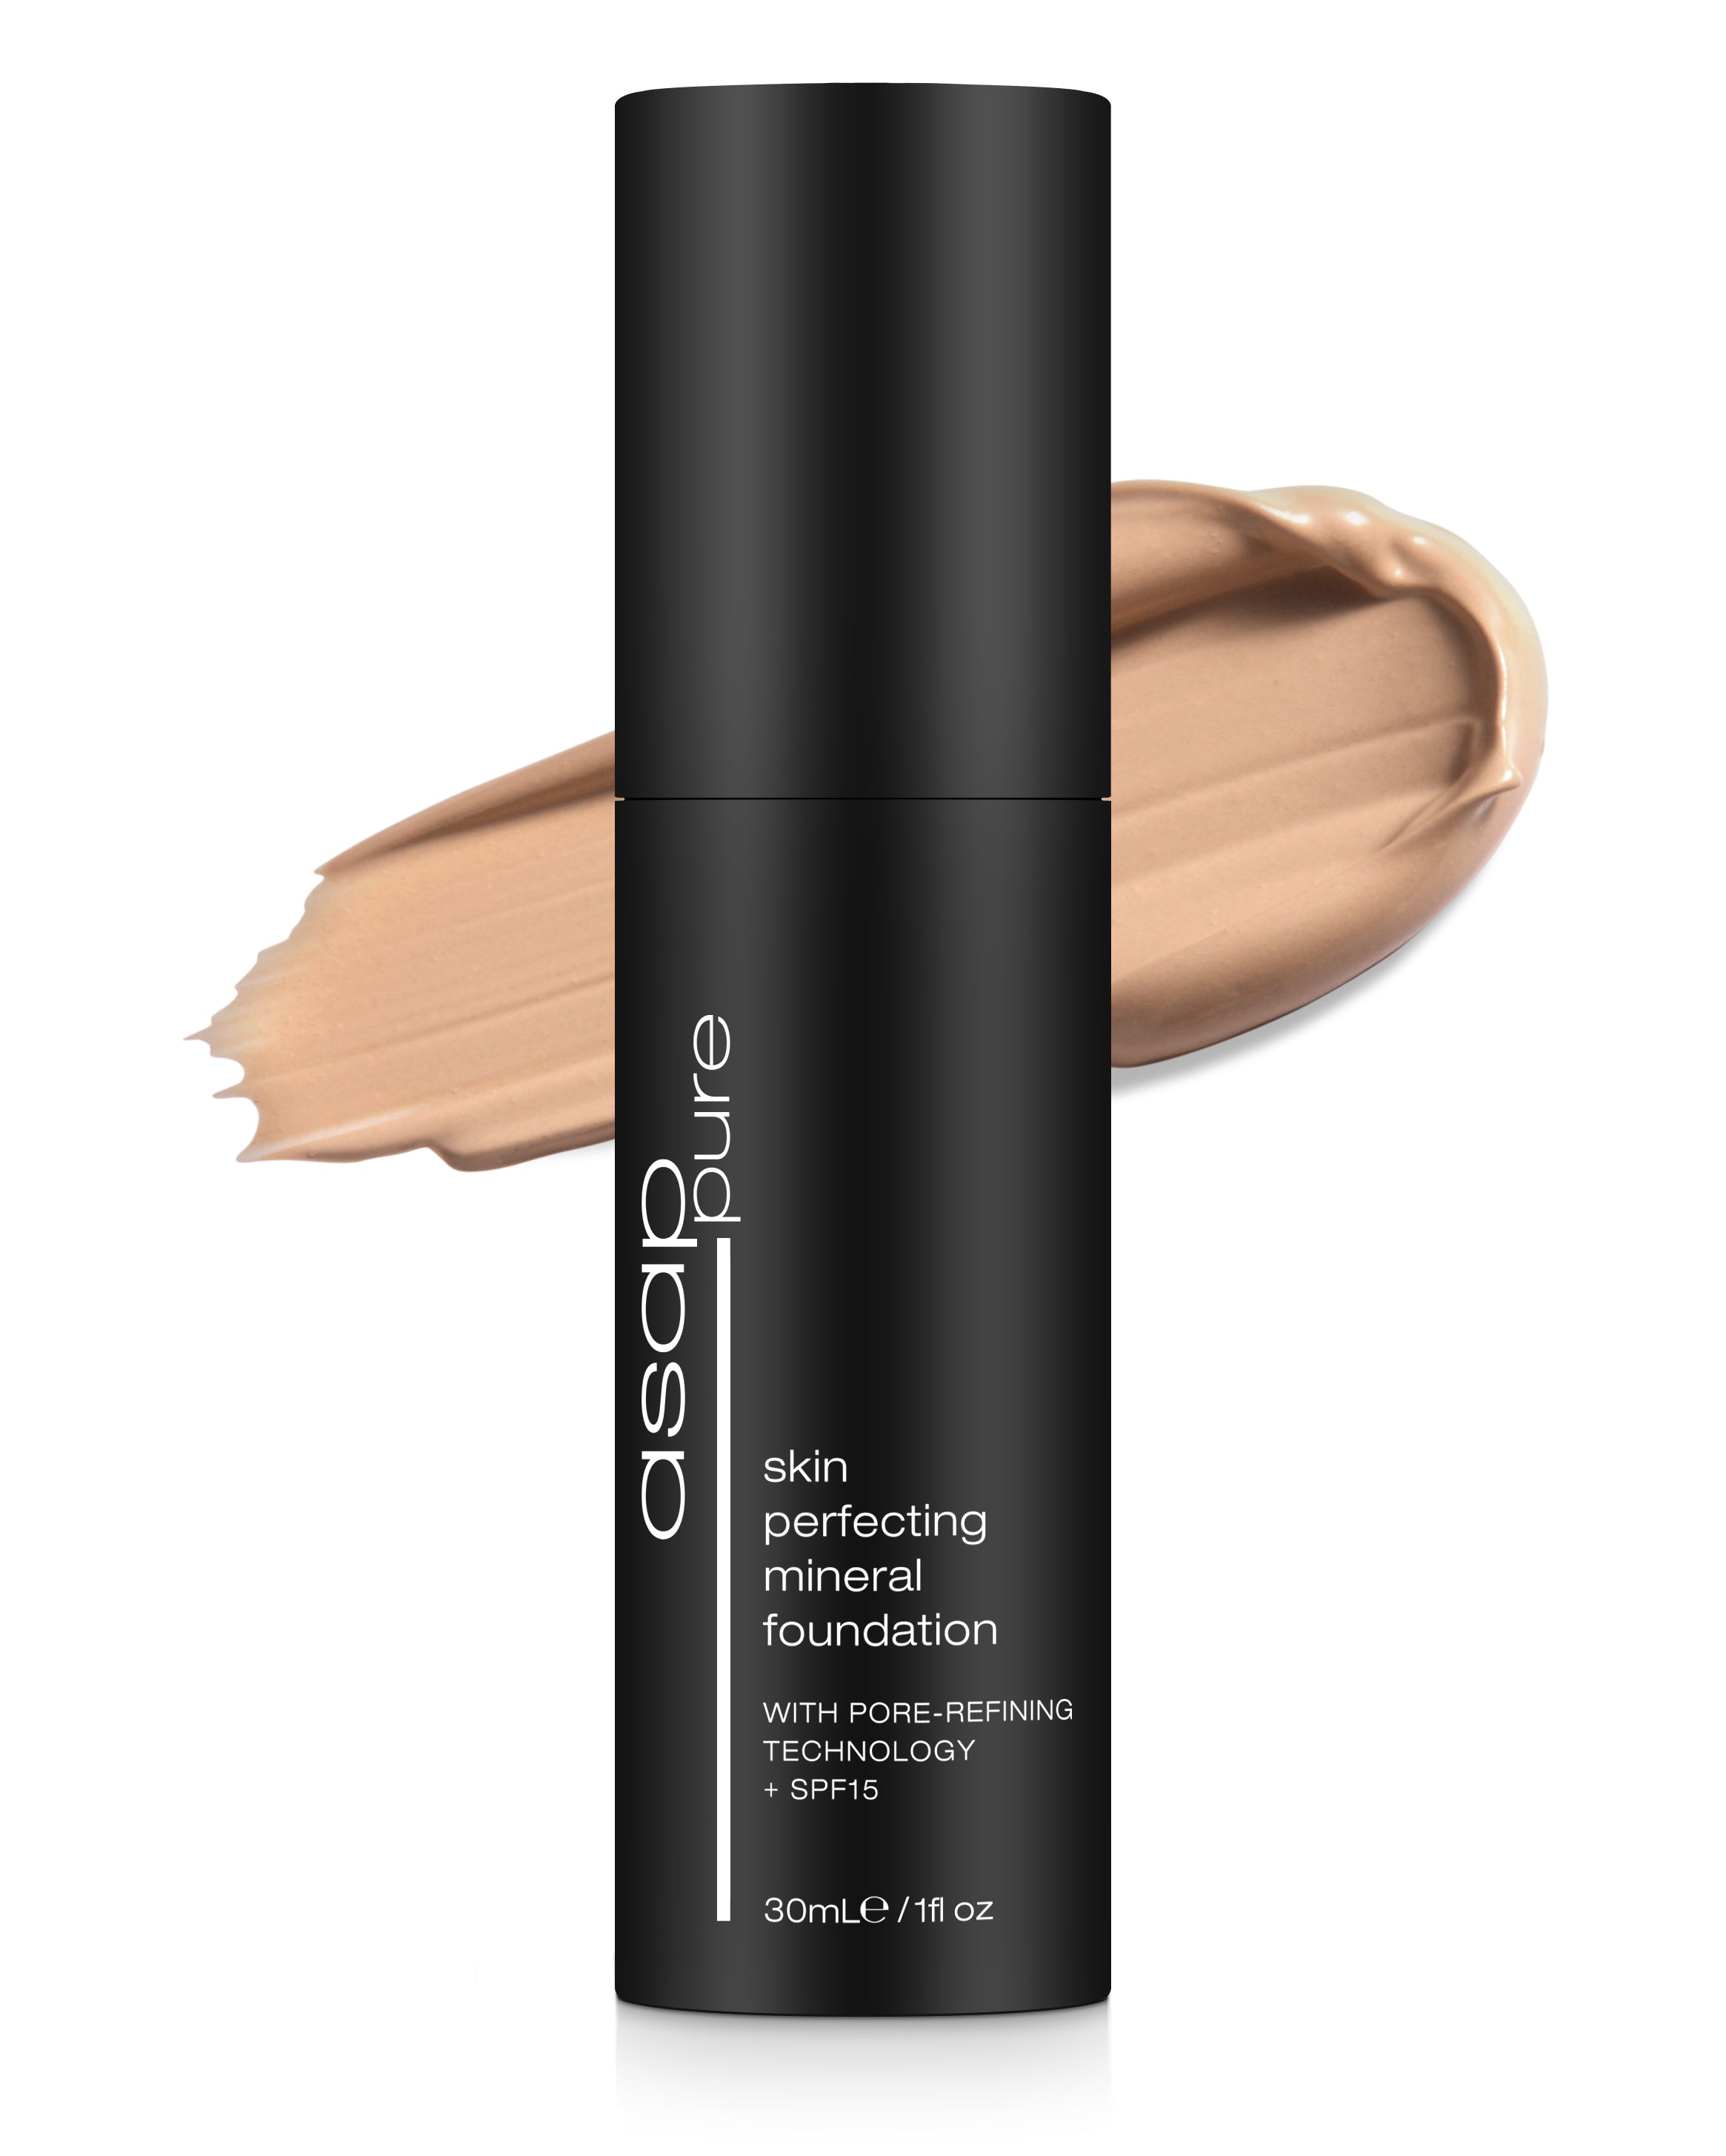 ASAP Pure Skin Perfecting Mineral Foundation